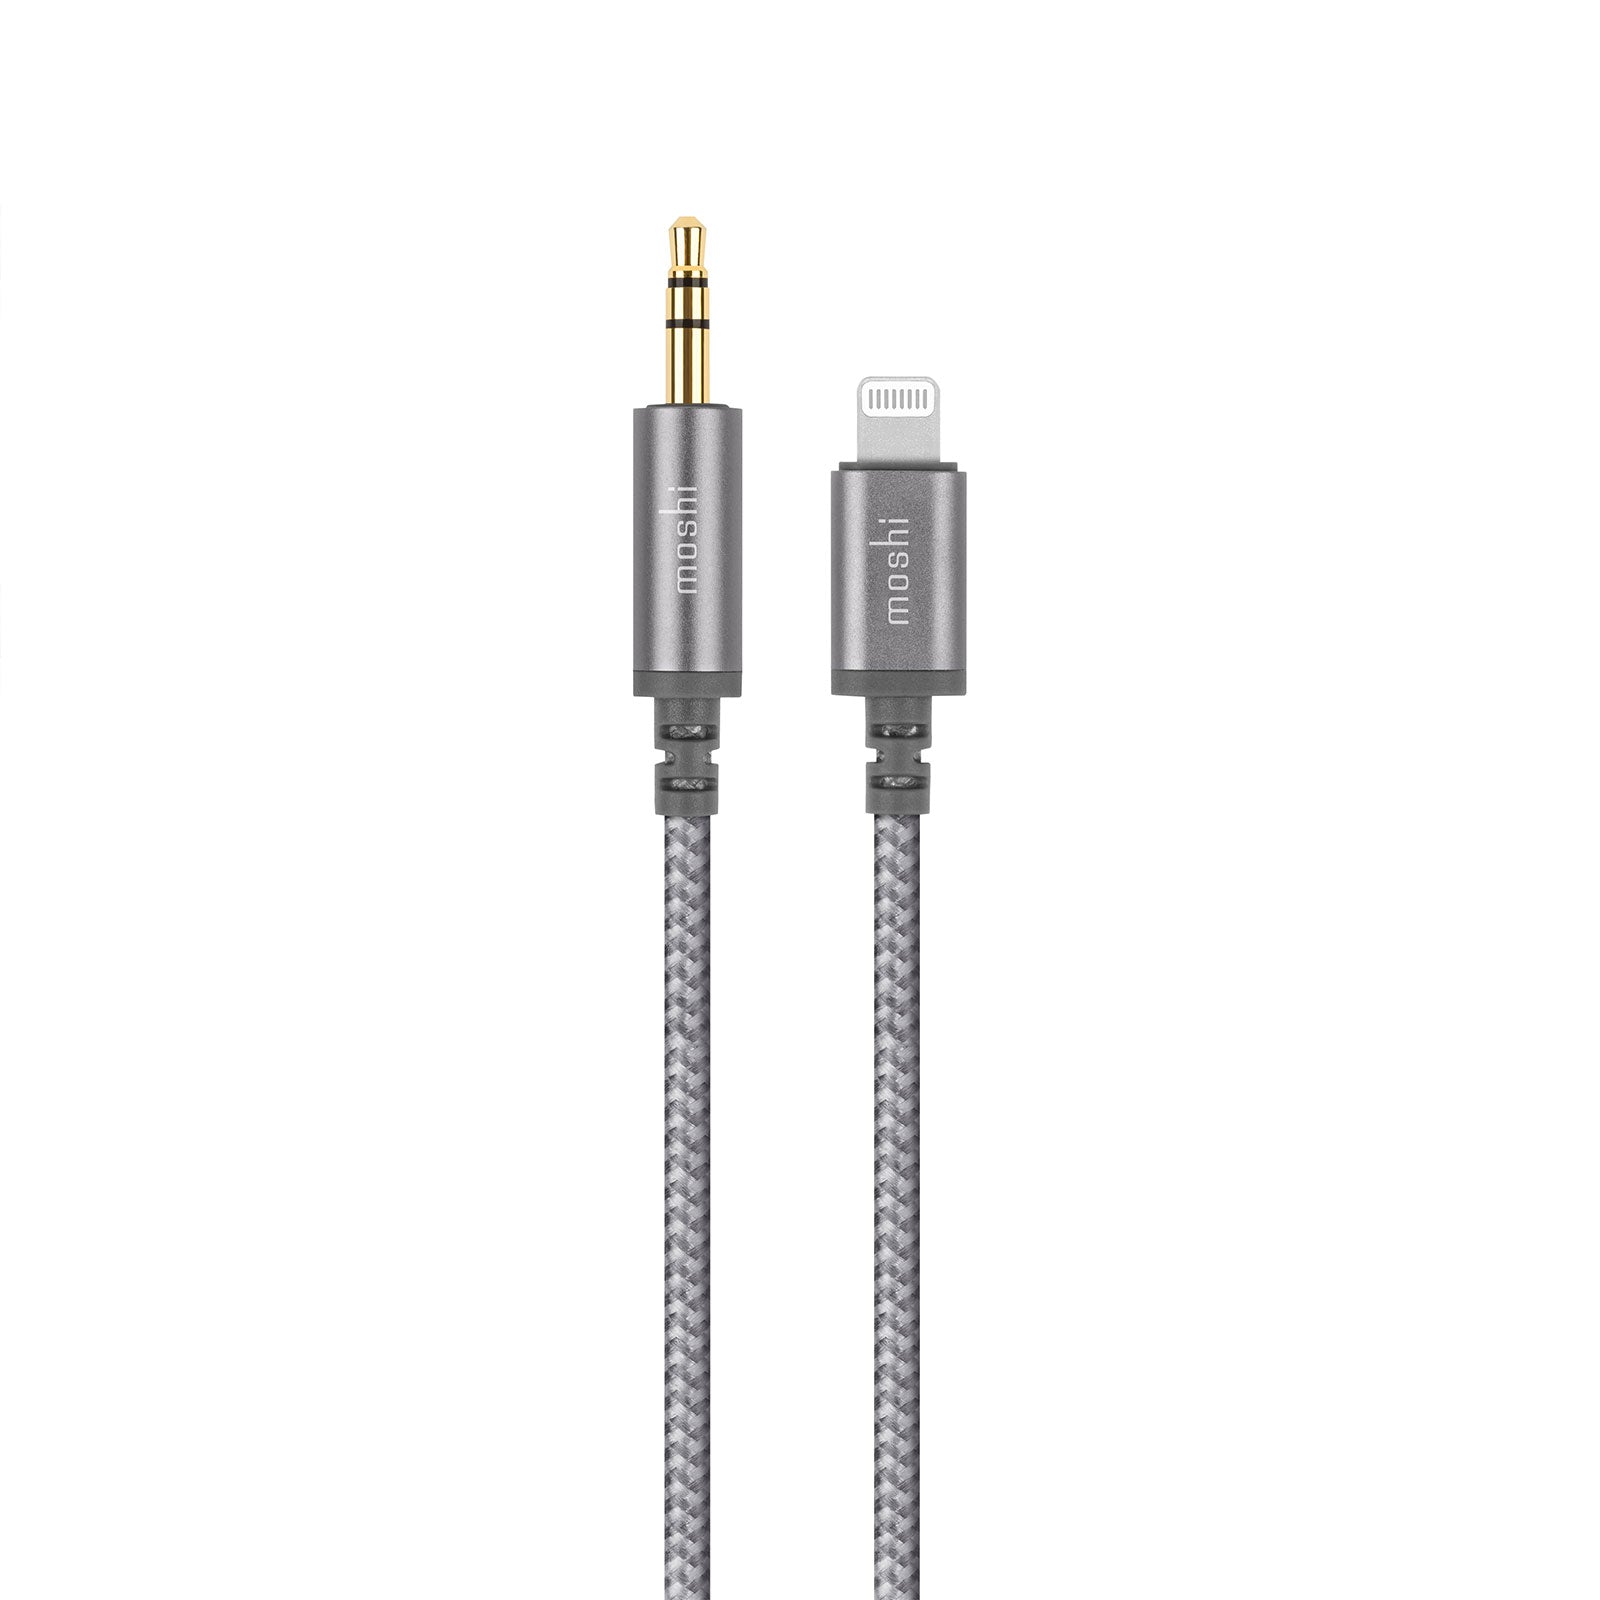 Apple Lightning to 3.5 mm Audio Cable 3.9 ft. (1.2 m) - White